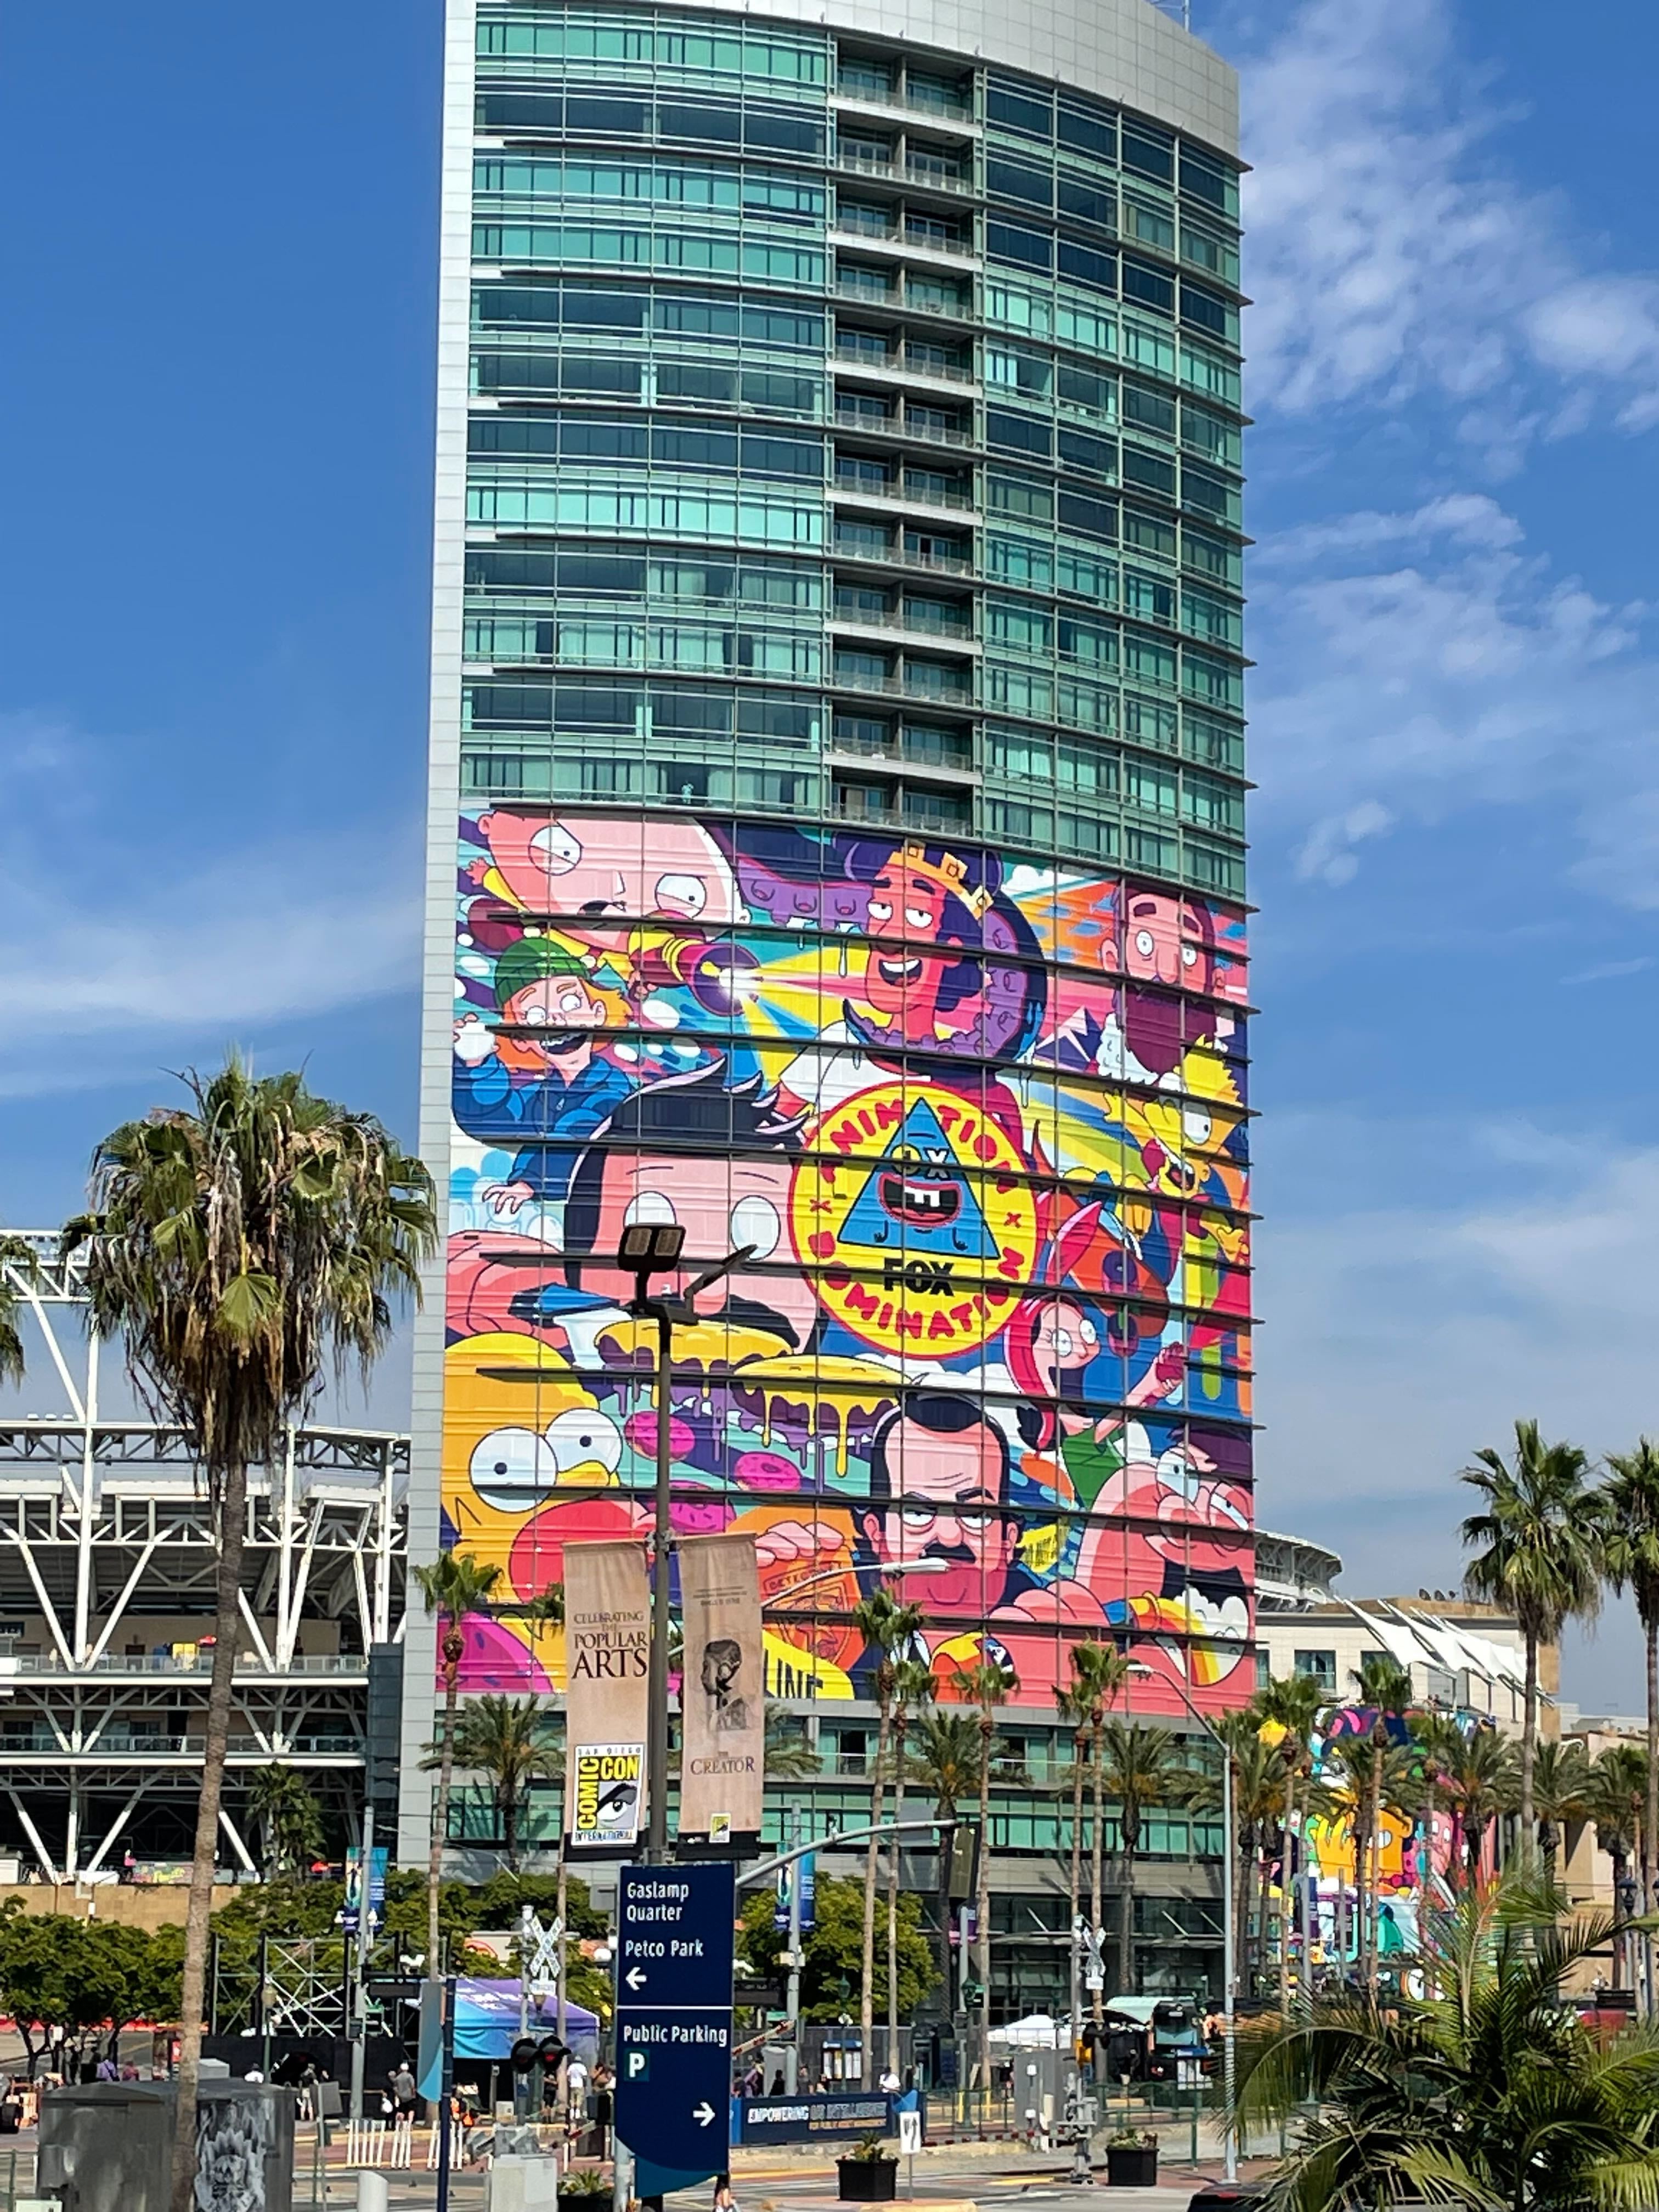 Exterior photographs of downtown San Diego and the San Diego Convention Center